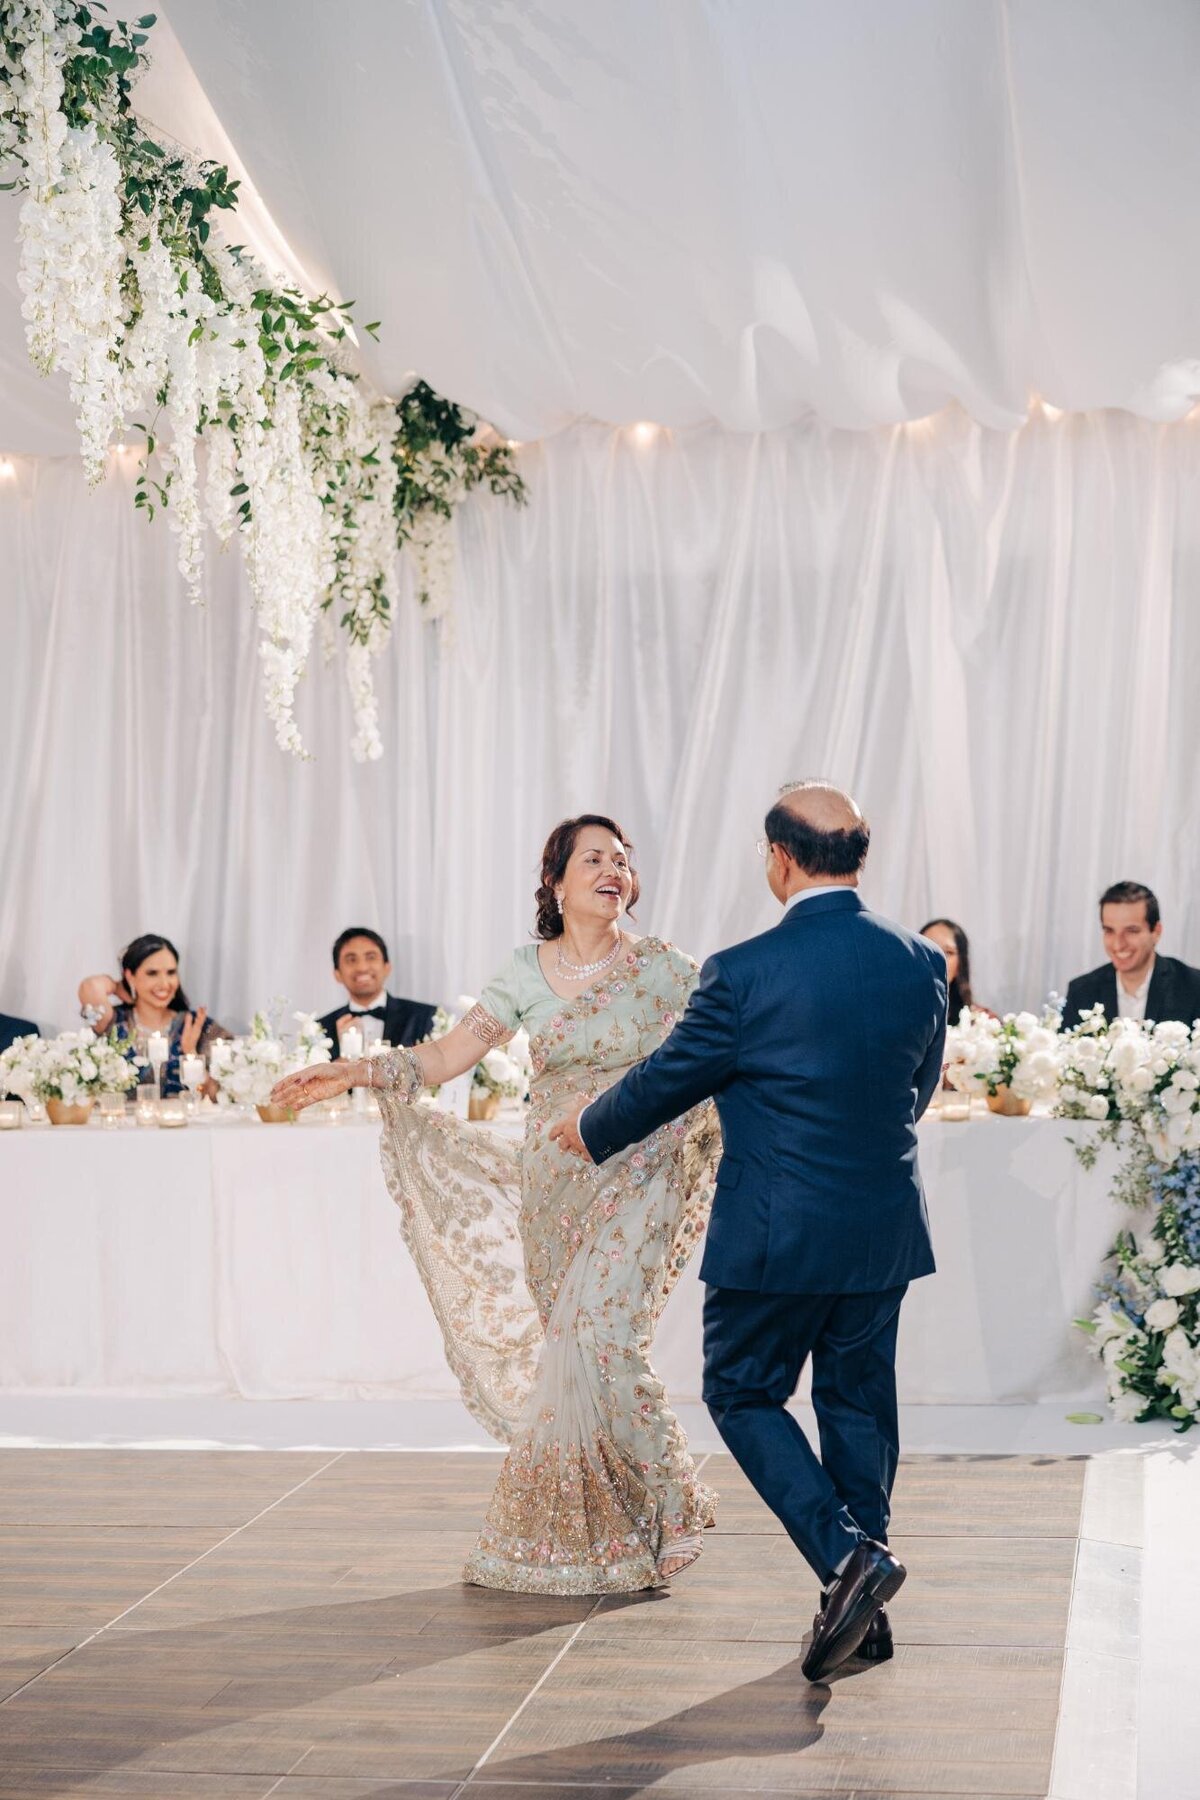 A bride in a beaded dress laughing joyfully while dancing with a man at a wedding reception, with guests watching in the background.